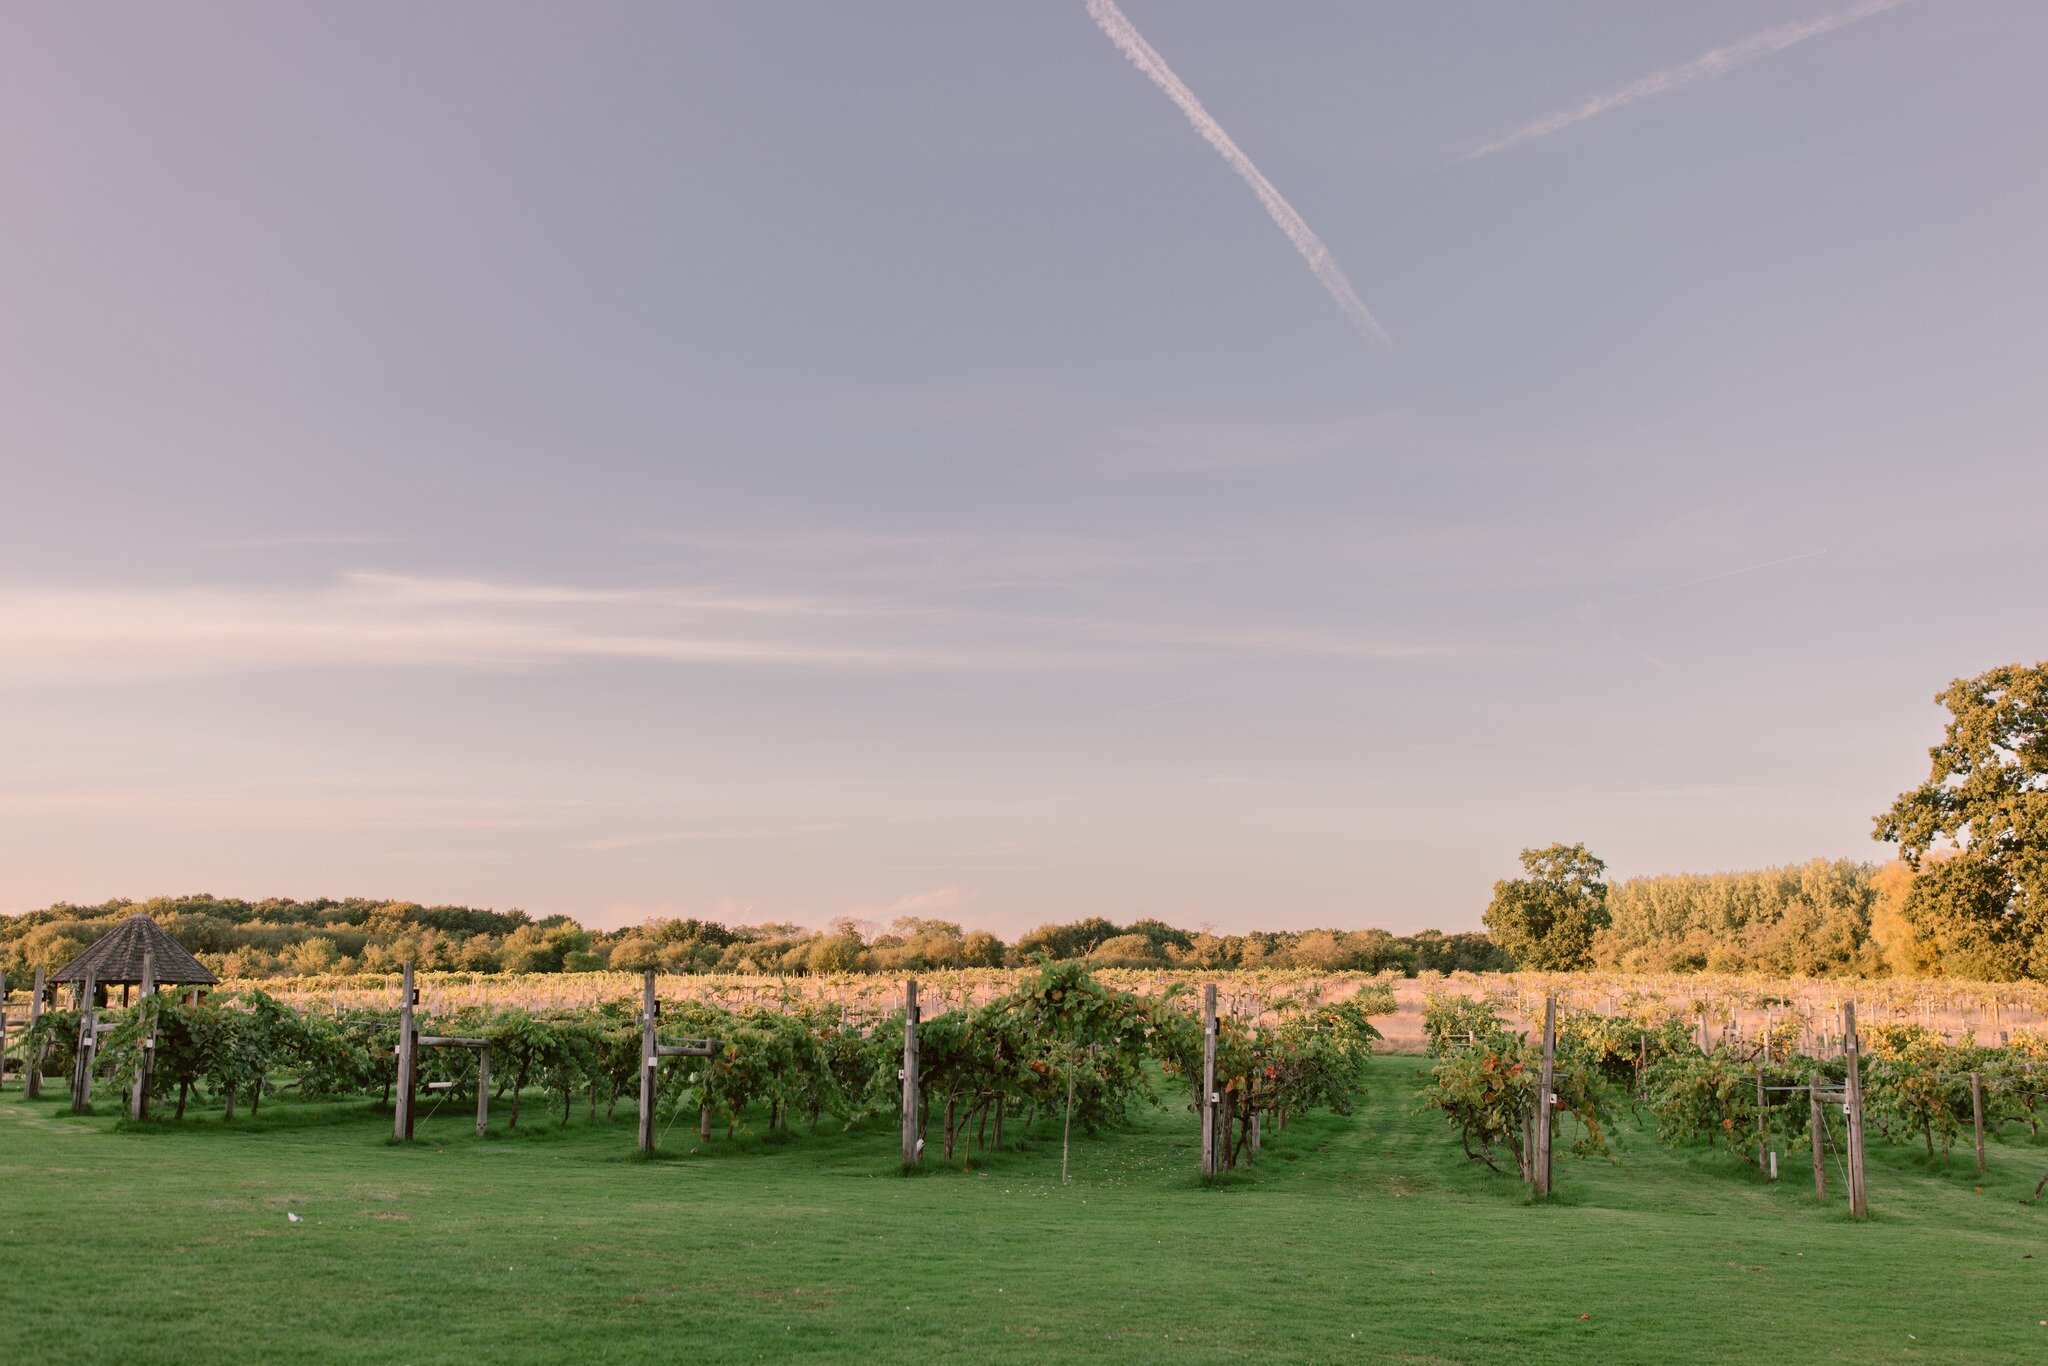 V I E W S ✨ Wickham Estate is not short of breath-taking views all around the grounds. With the main barn &amp; courtyard facing the stunning vines, you and your guests will be surrounded by unique views to make your day extra special. 

Photograph t